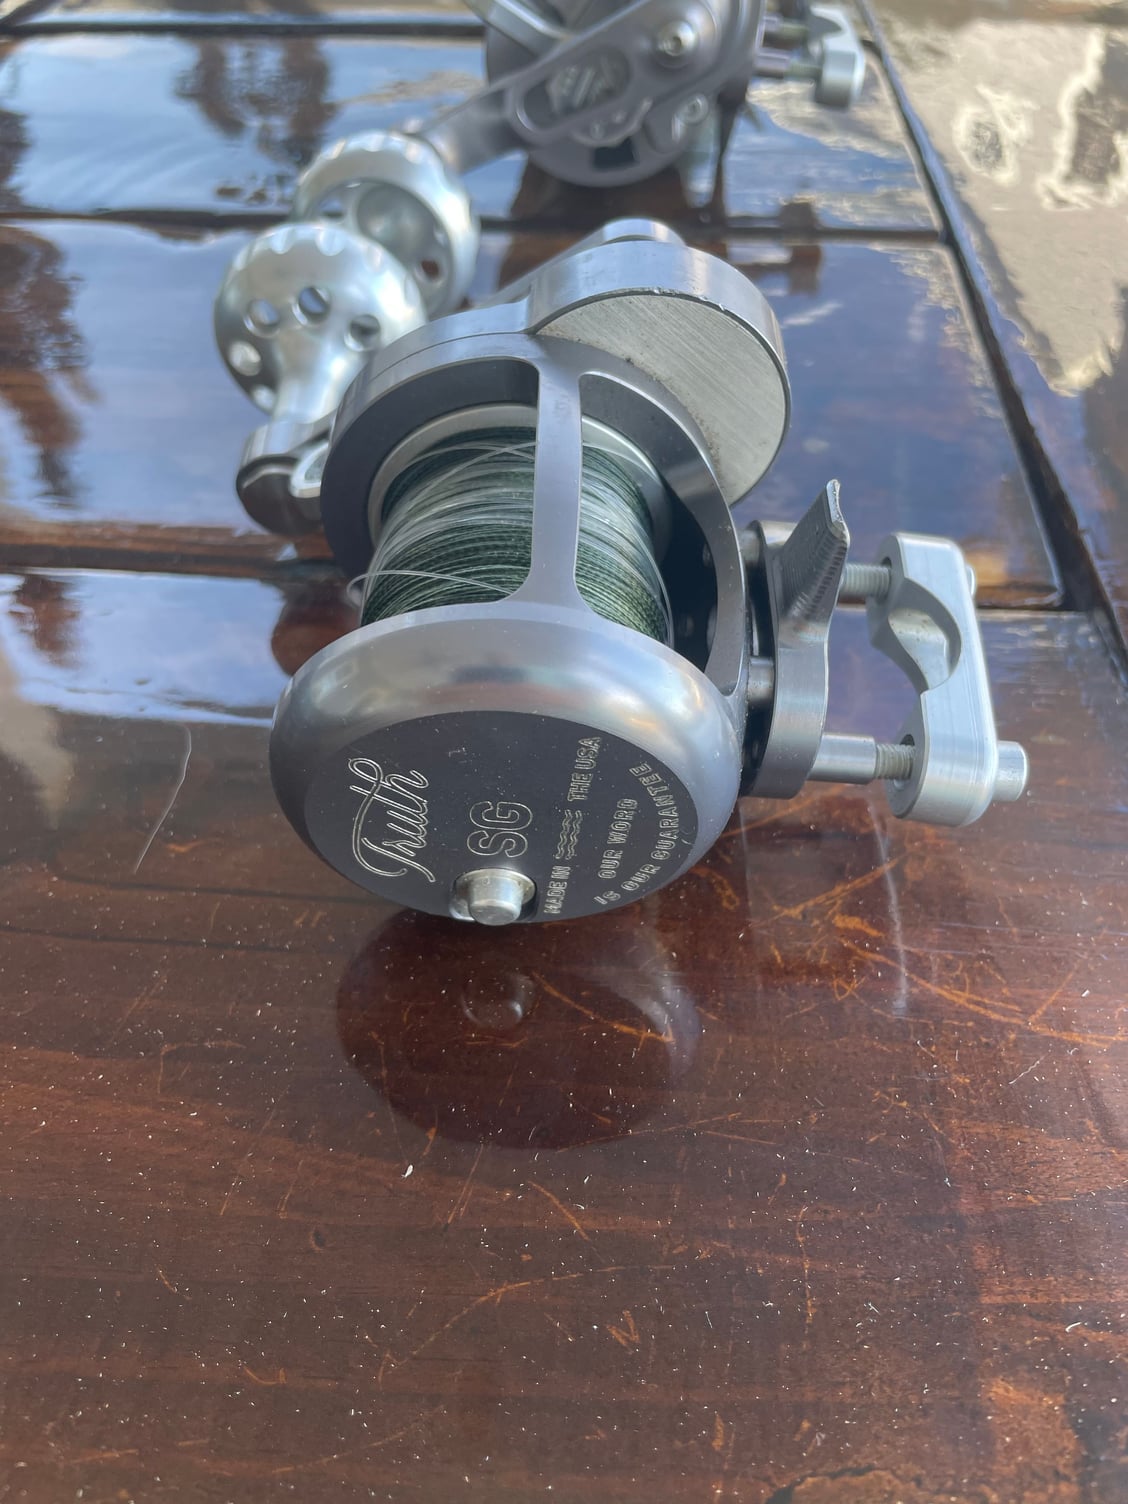 Seigler/Truth reels For Sale - The Hull Truth - Boating and Fishing Forum